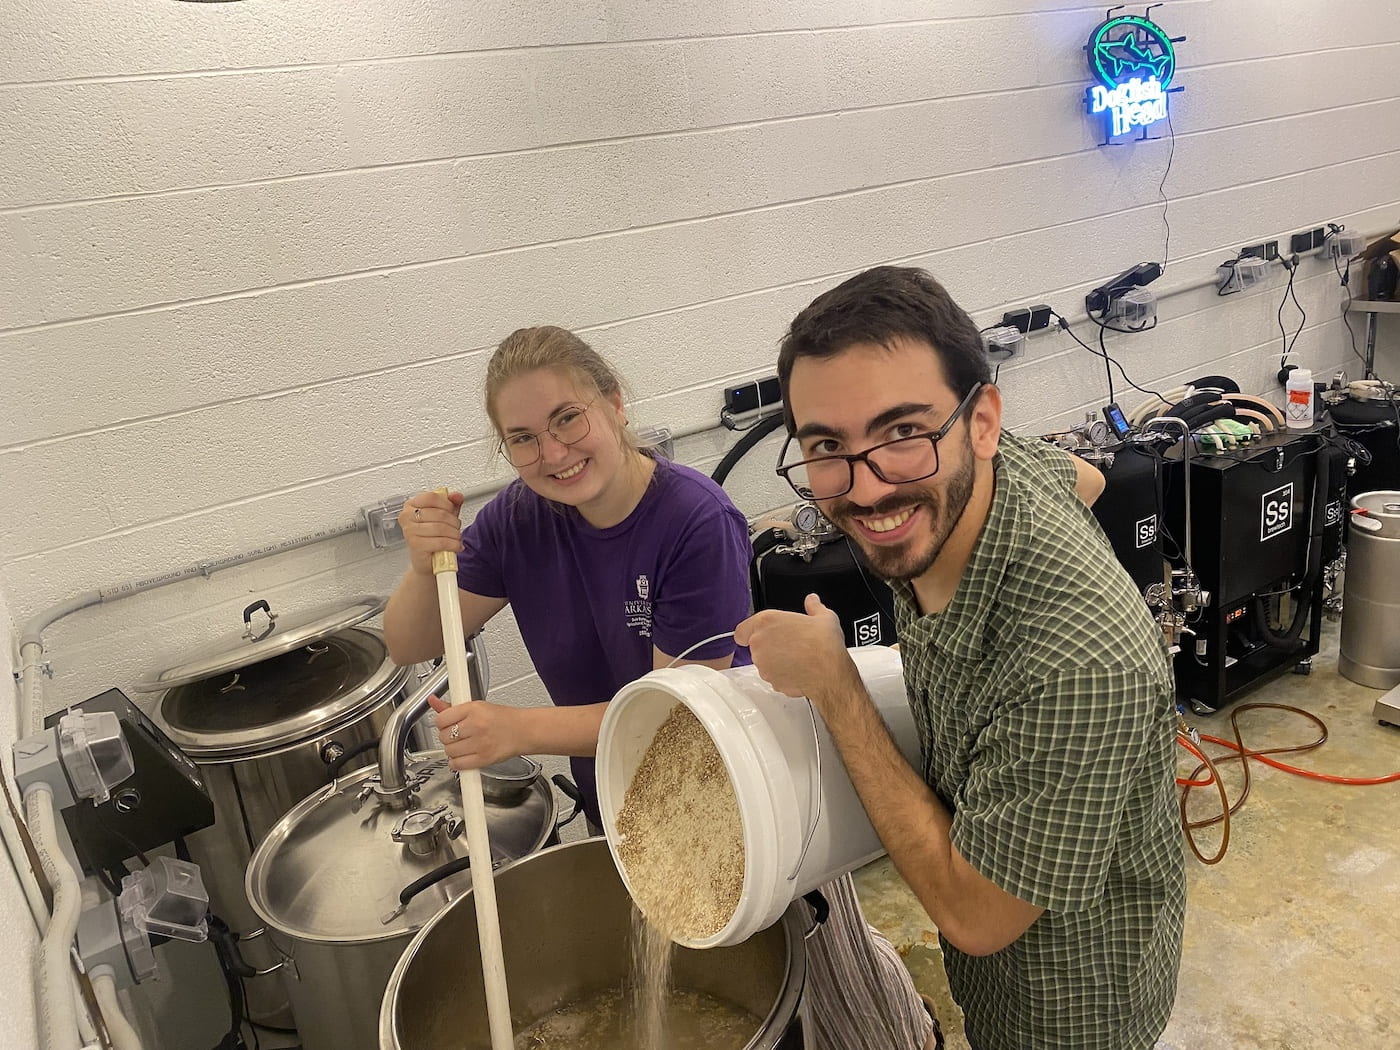 BREWING SCHOOL — Larissa Morley, left, a horticulture major, created the "Roasted Revelry Stout" oatmeal stout, and Bernardo Guimaraes, a doctoral food science student, created two IPA (India pale ale) beers as part of the new BREW 4573/5573 Beer Production and Analysis course. (U of A System Division of Agriculture photo)